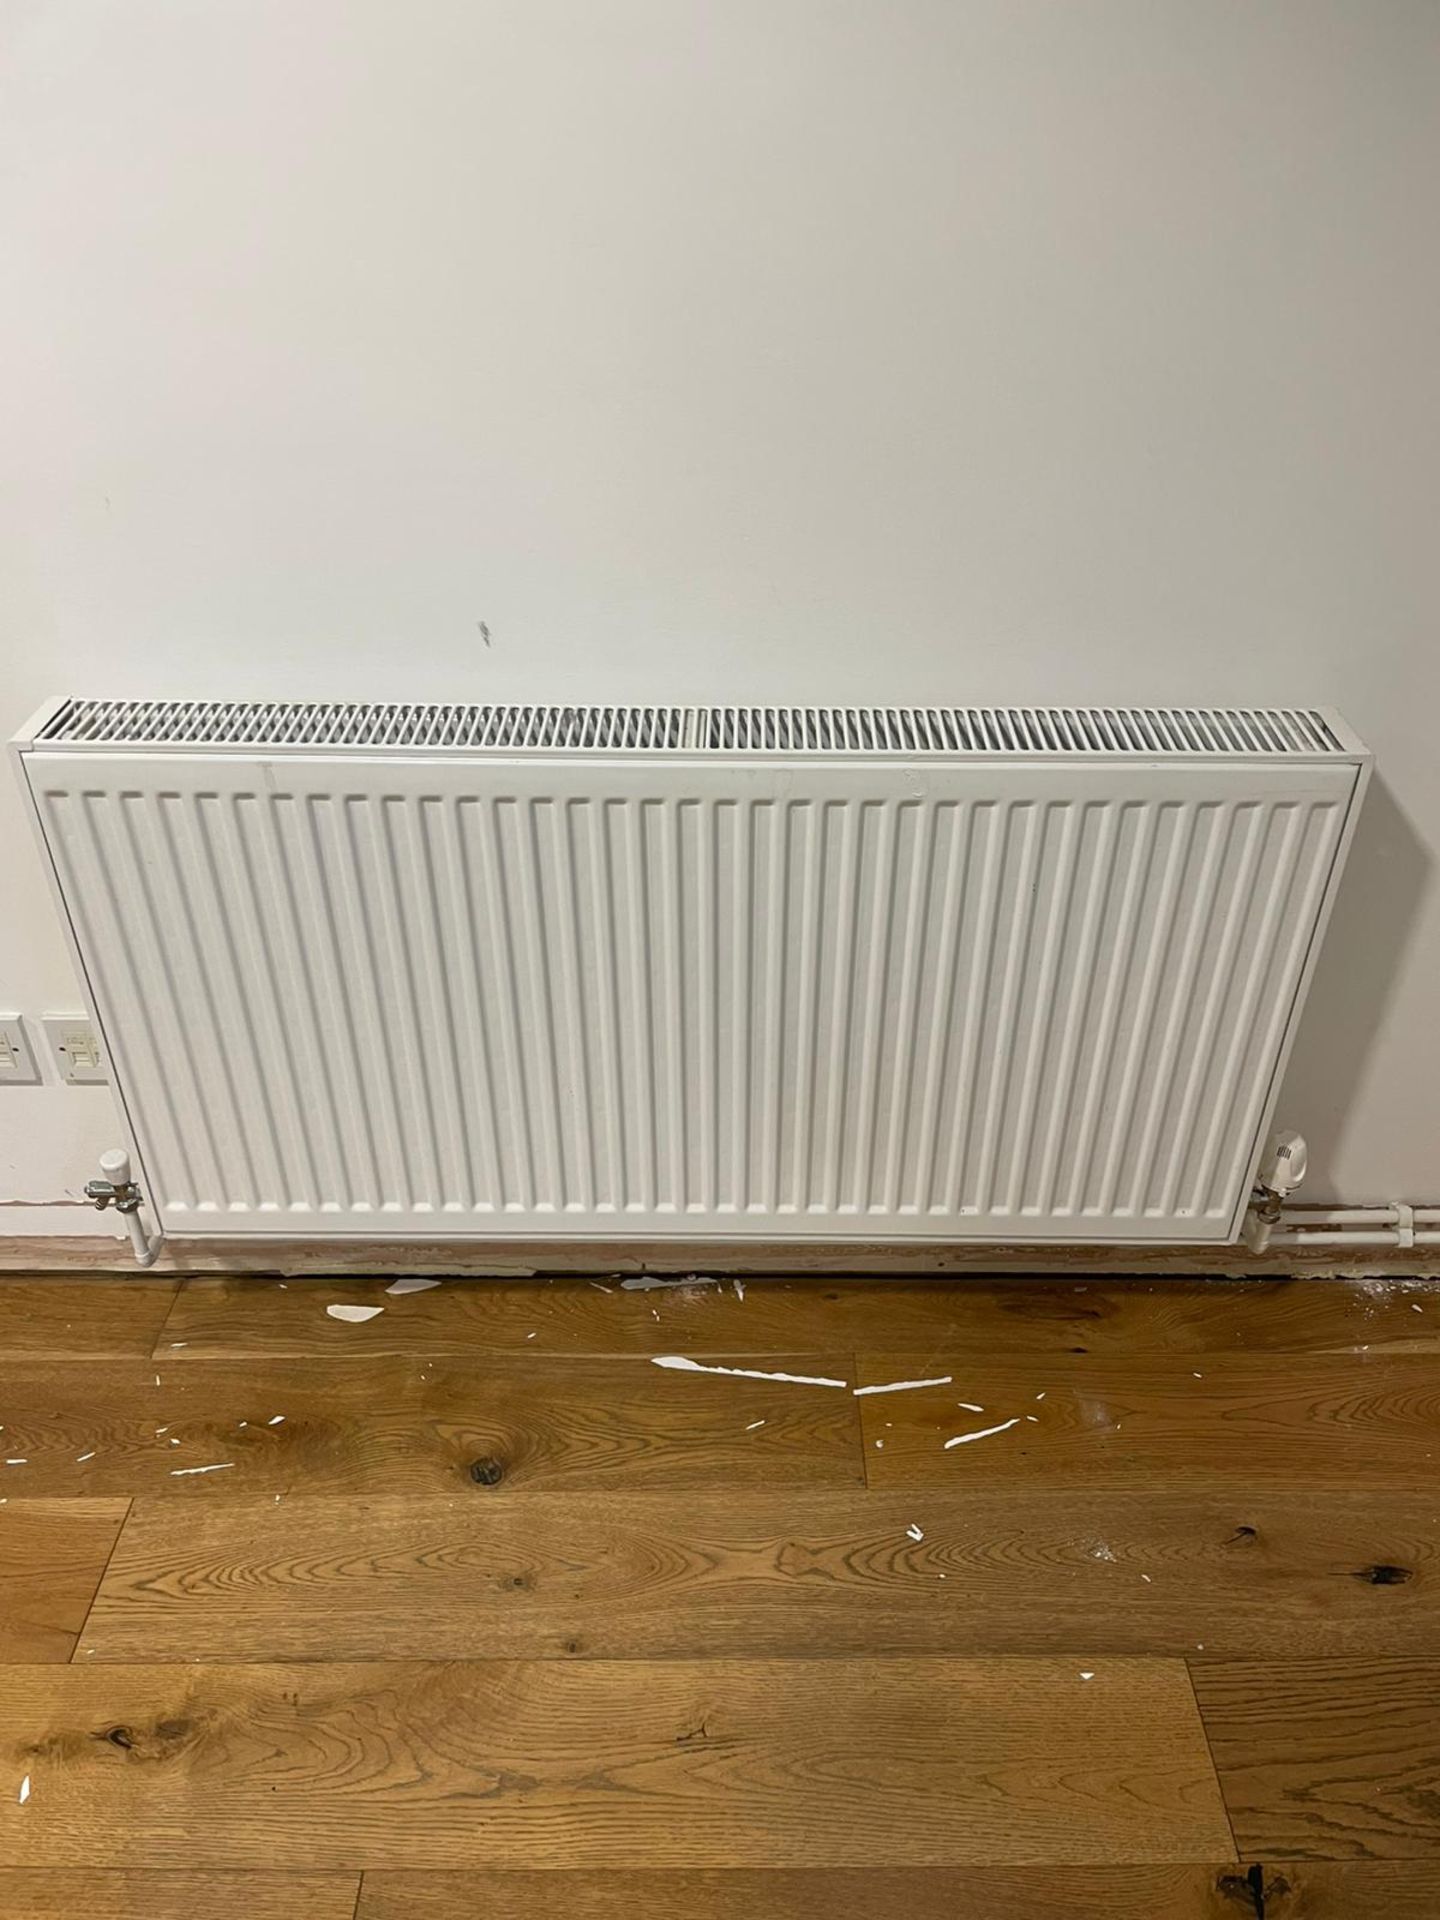 4 x Central Heating Radiators 120(W) x 60cm(H) - To Be Removed From An Executive Office